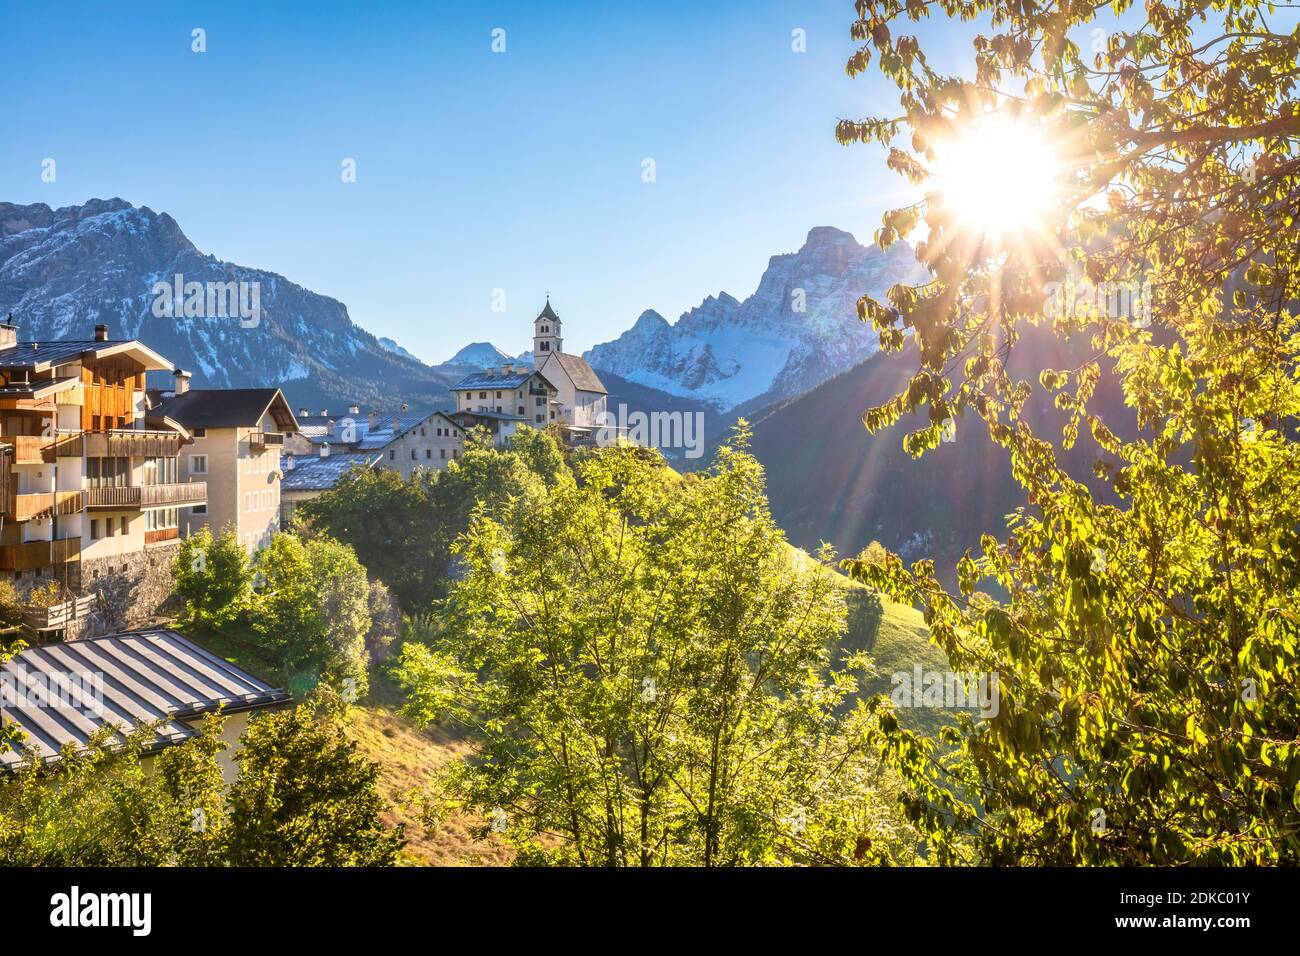 a classic glimpse of the village of Colle Santa Lucia dominated by the parish church and Mount Pelmo in the background, autumn scene with the sun in the sky, Agordino, province of Belluno, Veneto, Italy, Europe Stock Photo